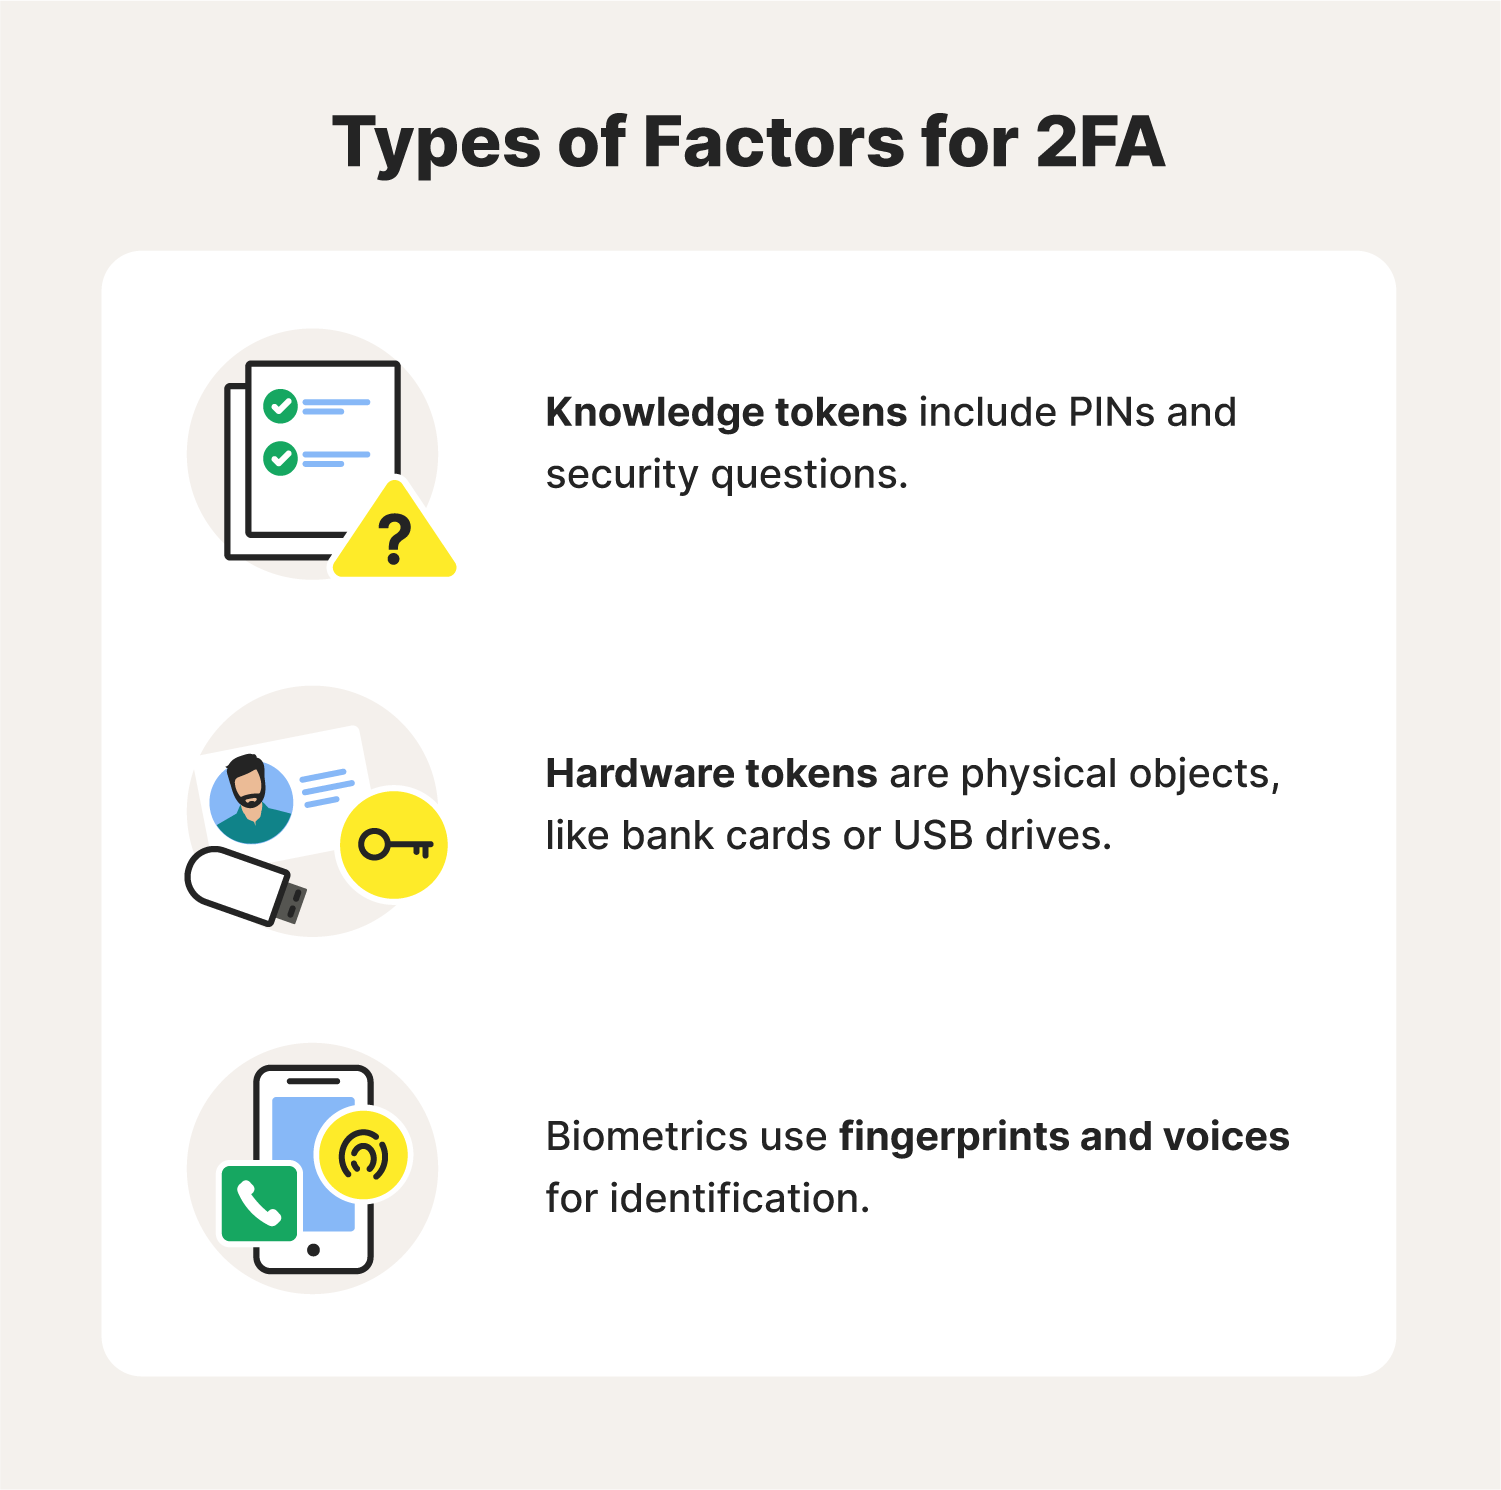 Illustrated chart defining the types of factors of 2FA (two-factor authentication).